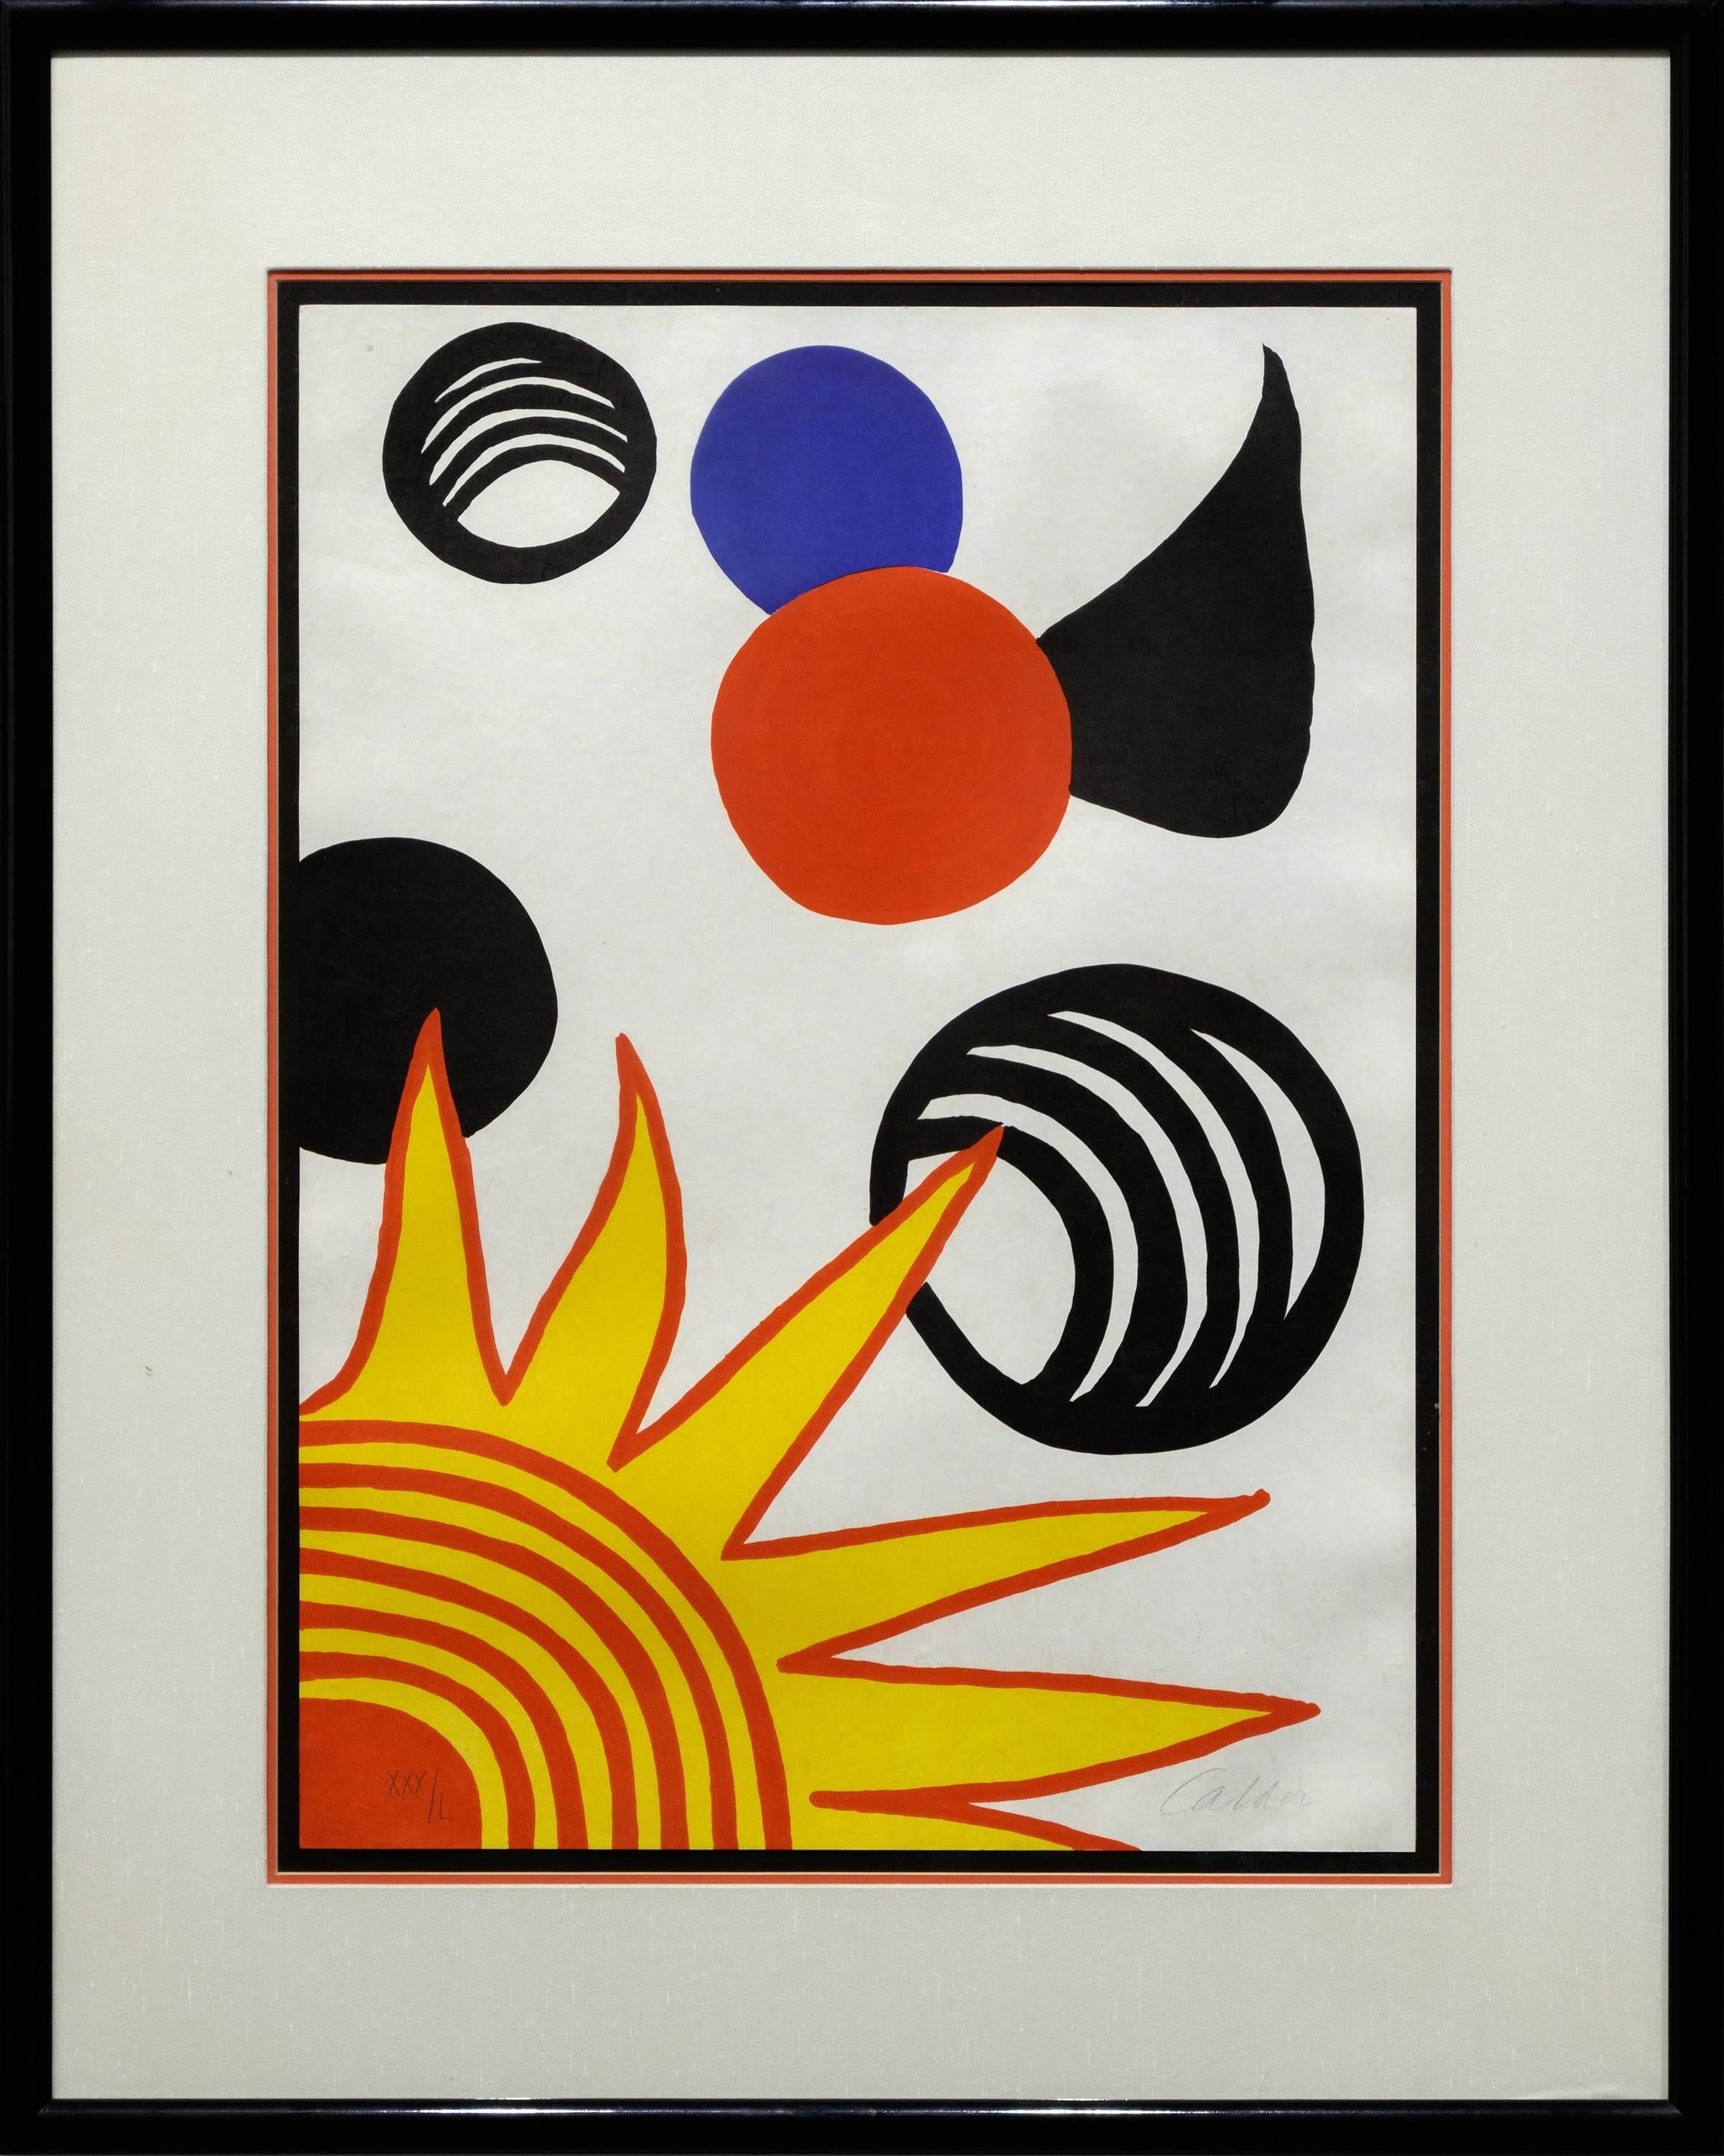 An abstract lithograph executed in bright primary red, yellow, blue and black circles, orbs and abstracted sun by Post War artist Alexander Calder. Signed lower right, 